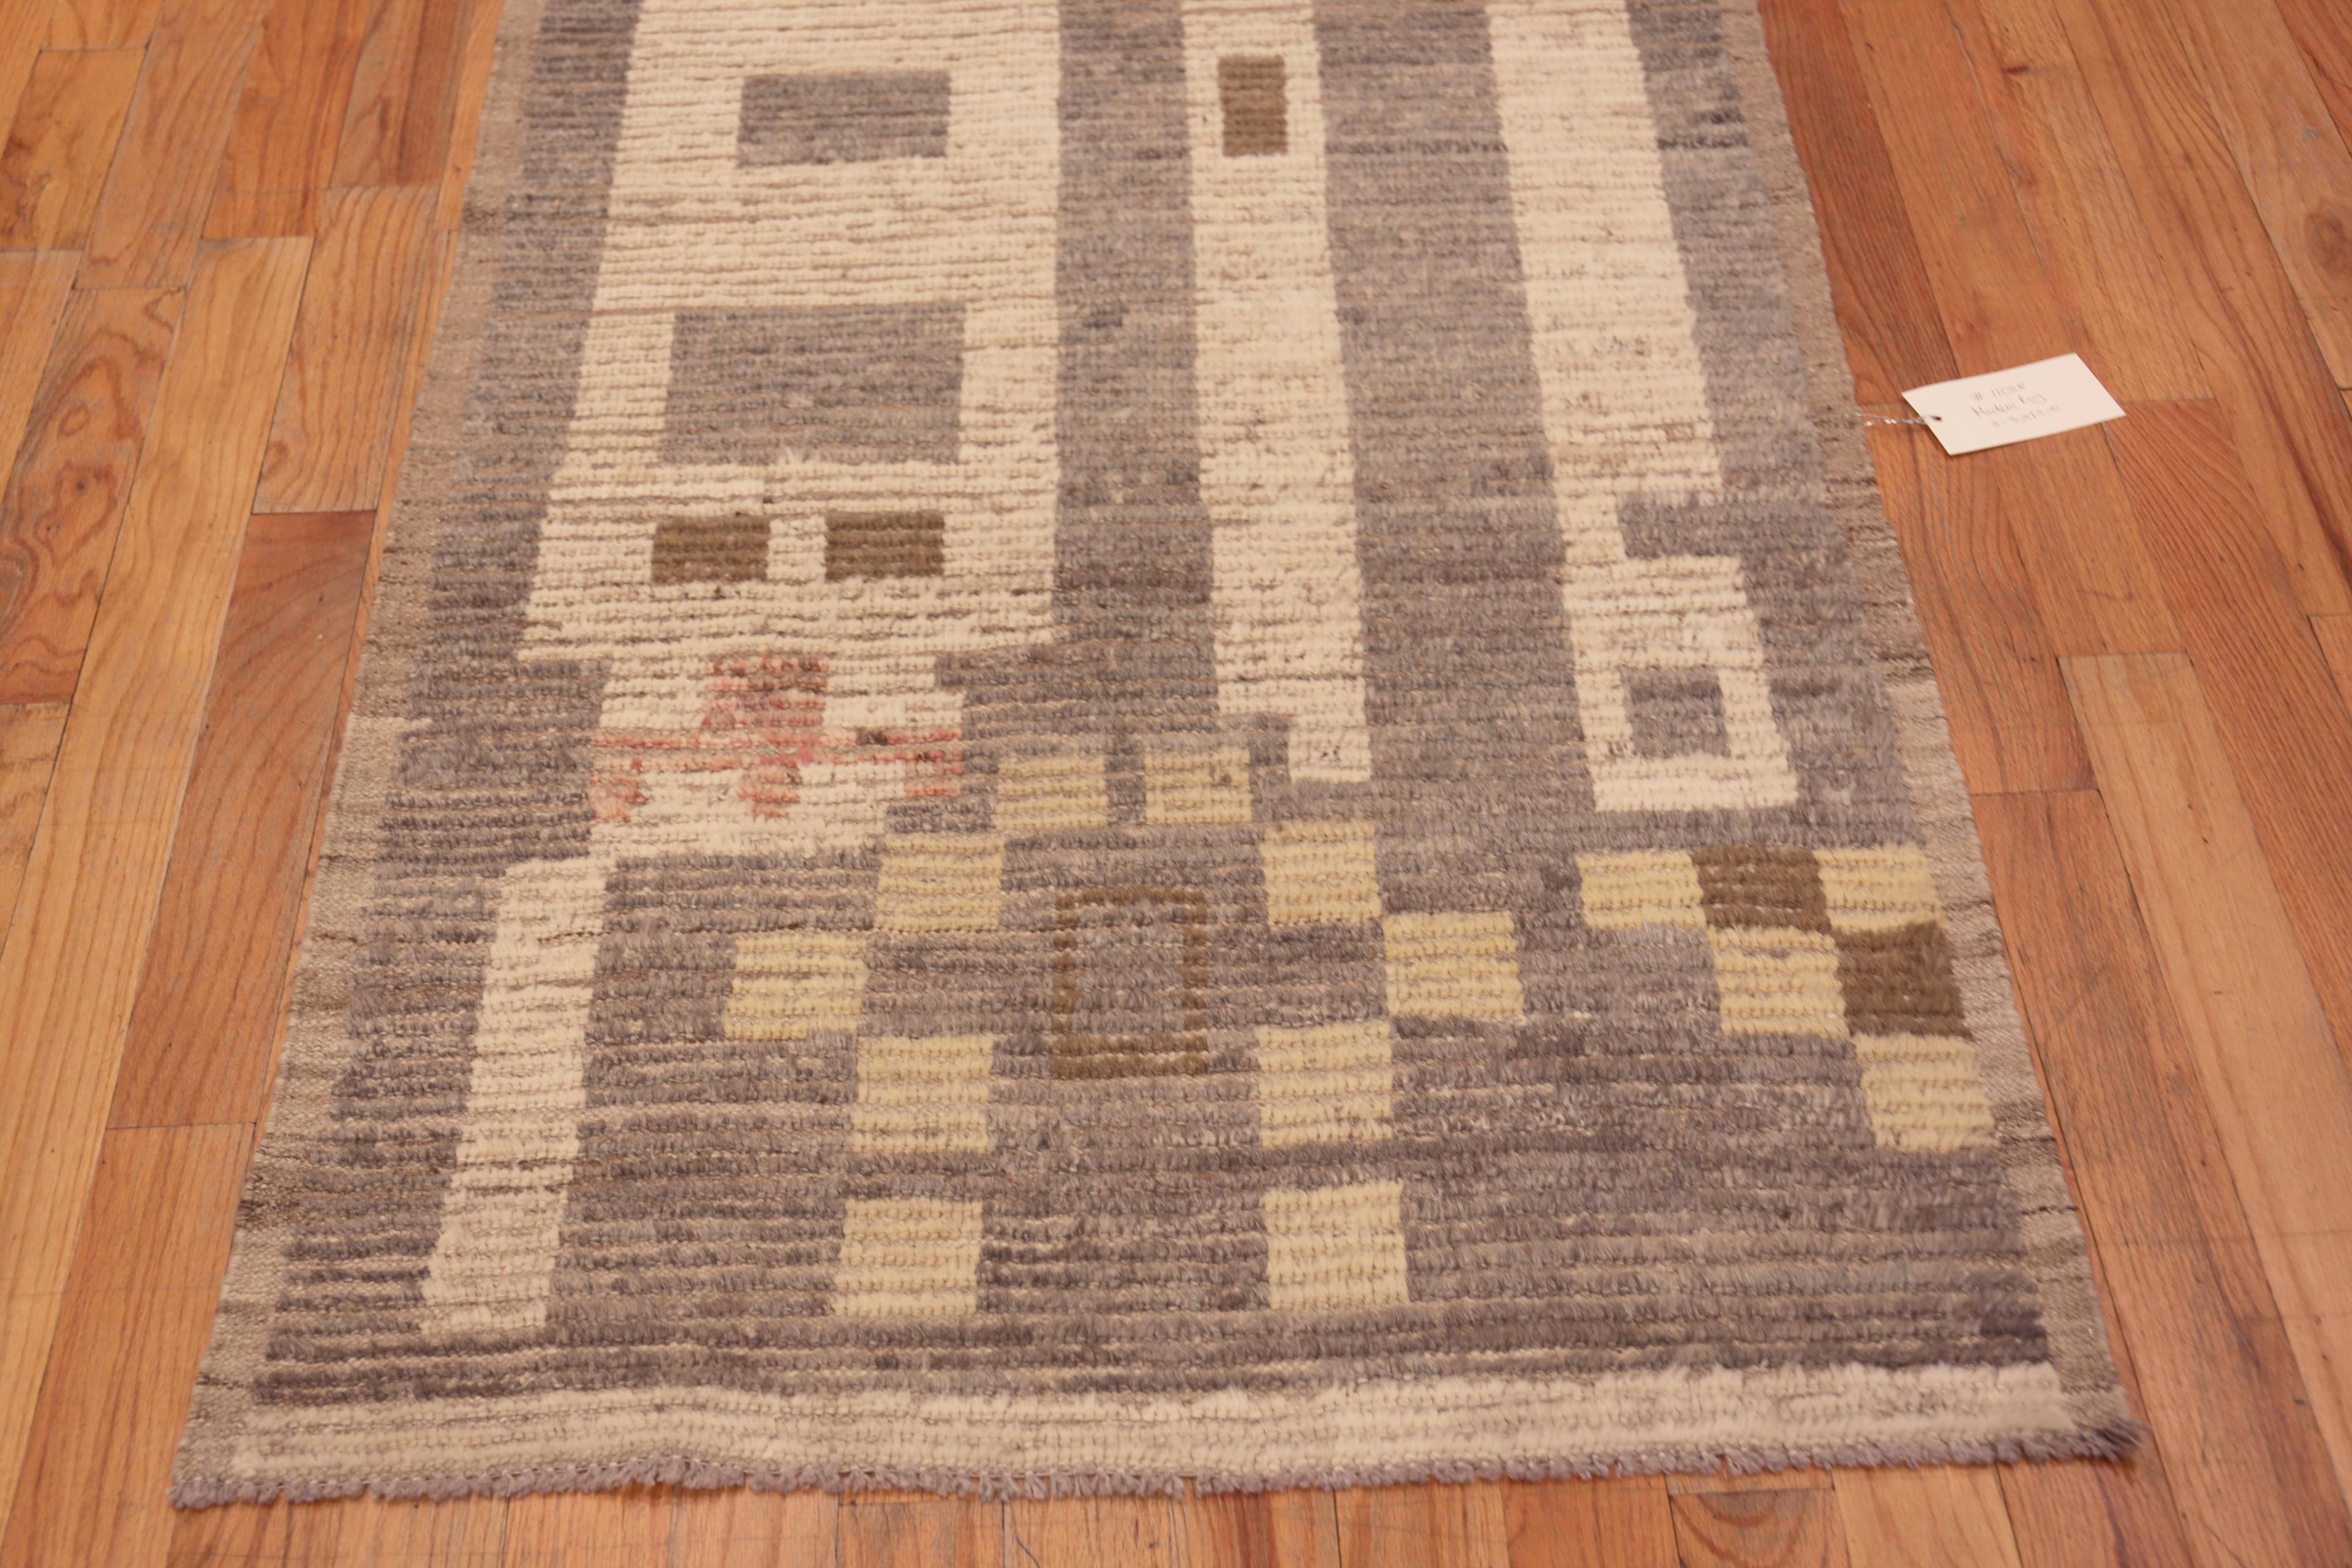 A Beautifully Artistic Tribal Geometric Neutral Color Modern Hallway Runner Rug, Country of Origin: Central Asia, Circa Date: Modern Rug 